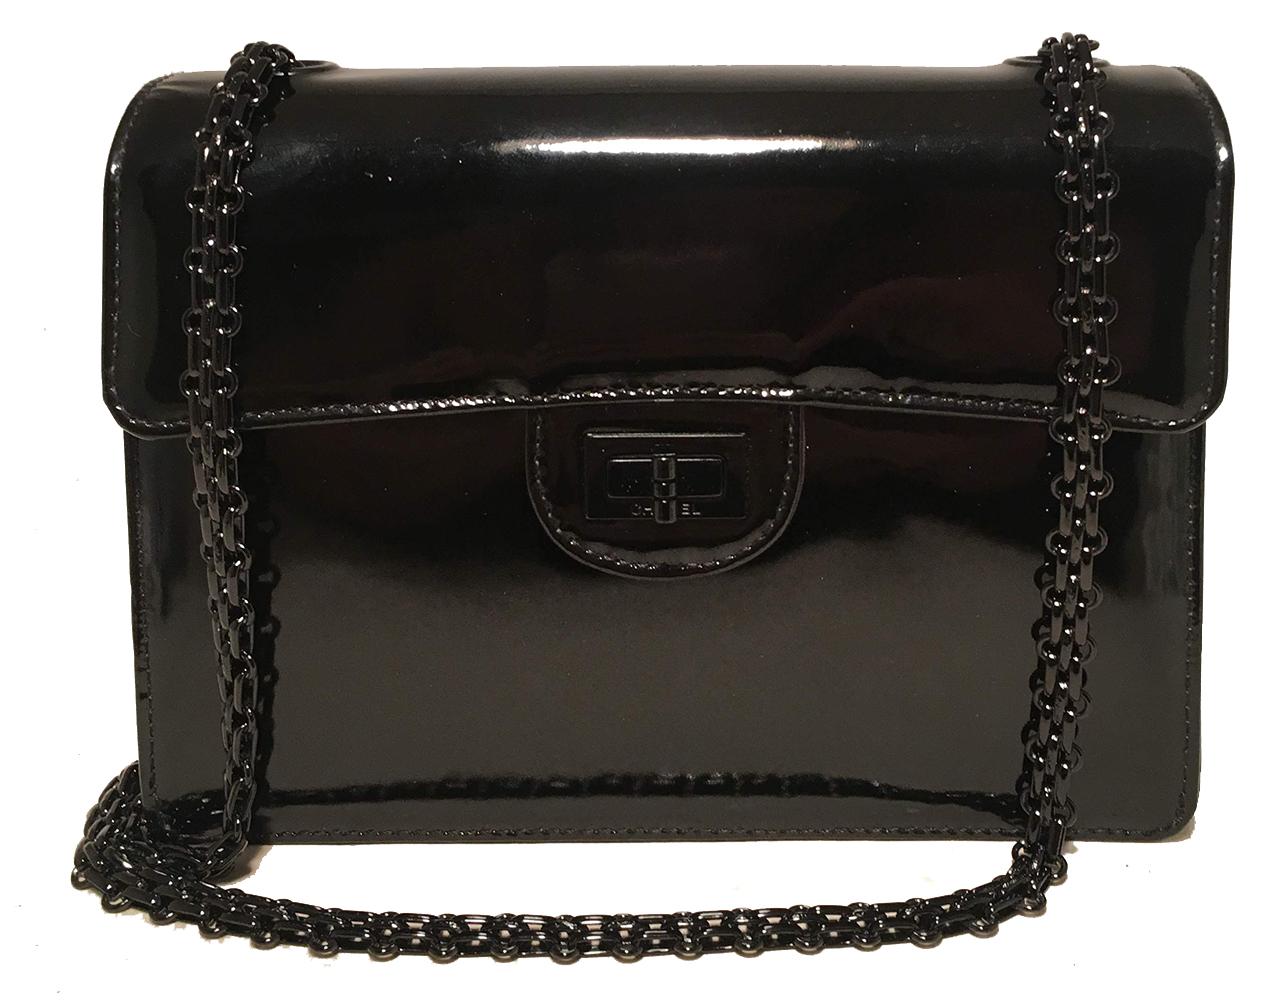 Chanel Black on Black Patent Leather Classic Flap Shoulder Bag in excellent condition. Black patent leather exterior trimmed with black hardware. Mademoiselle twist closure opens to a black leather interior that has one slit and one zipped side